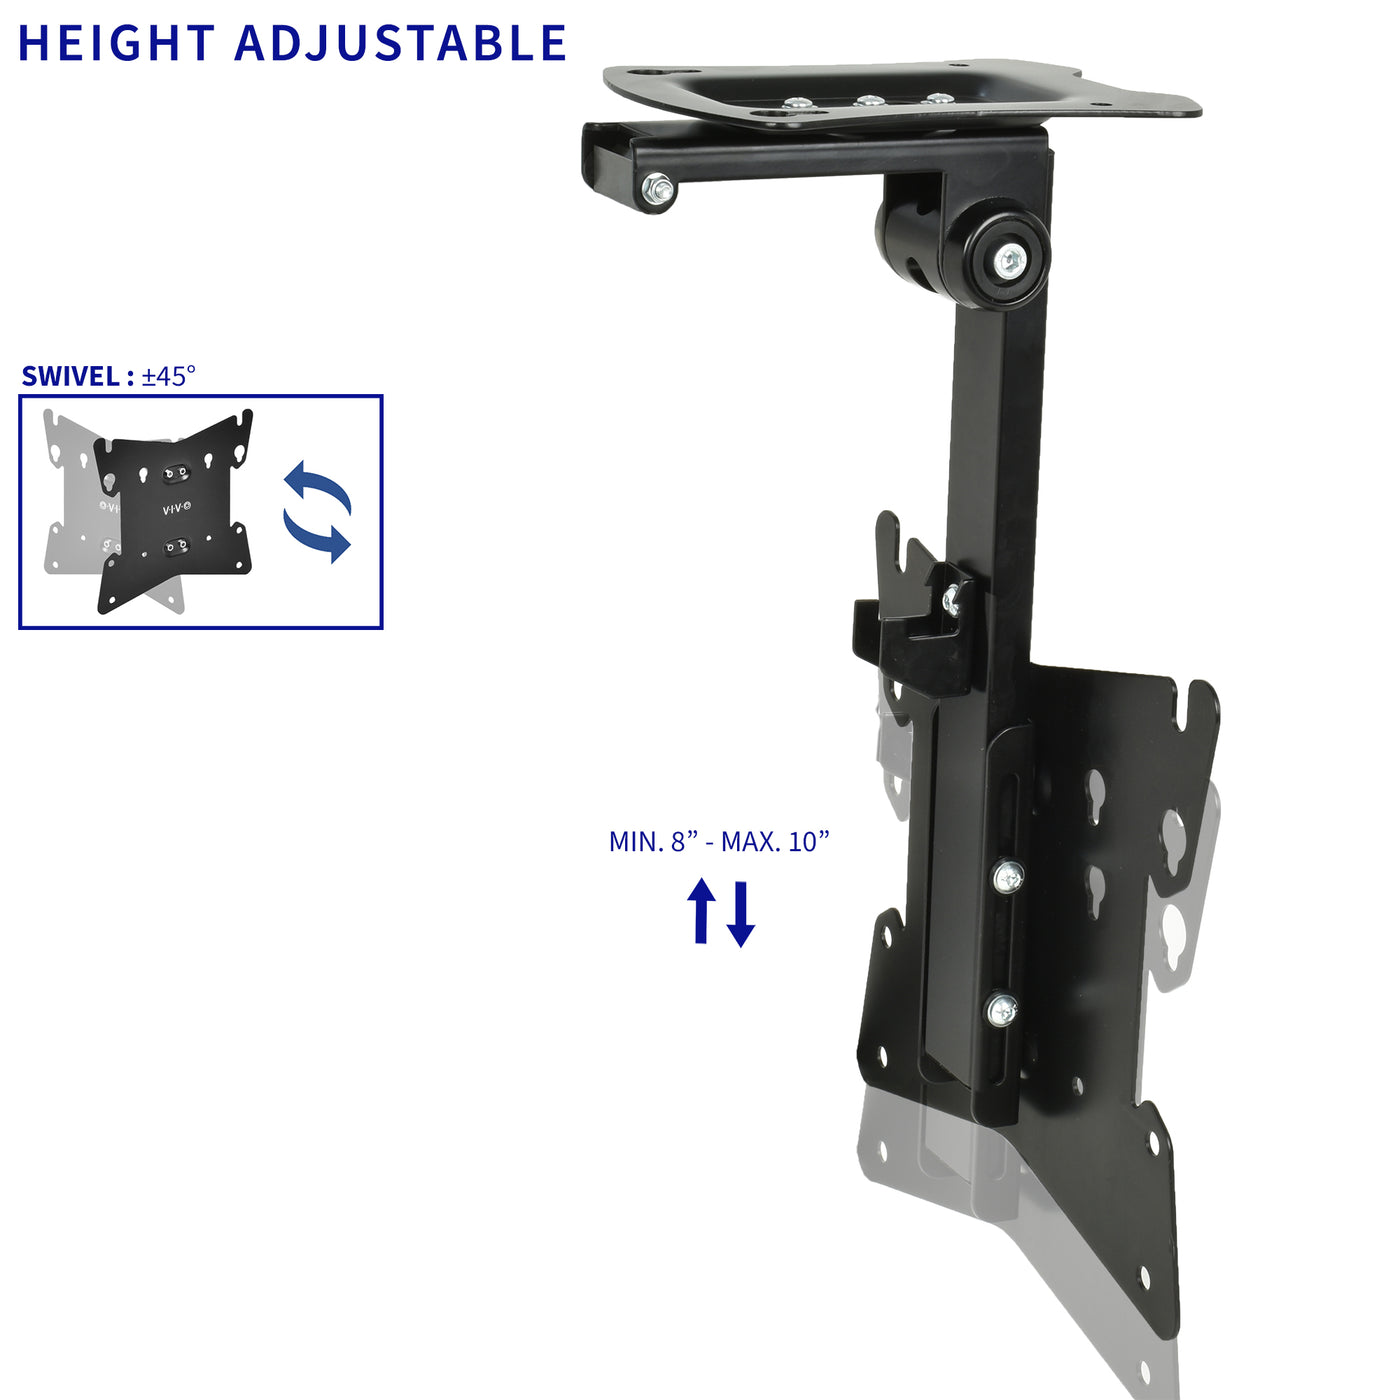 The mount is height adjustable along the center pole and also includes some degree of swivel.